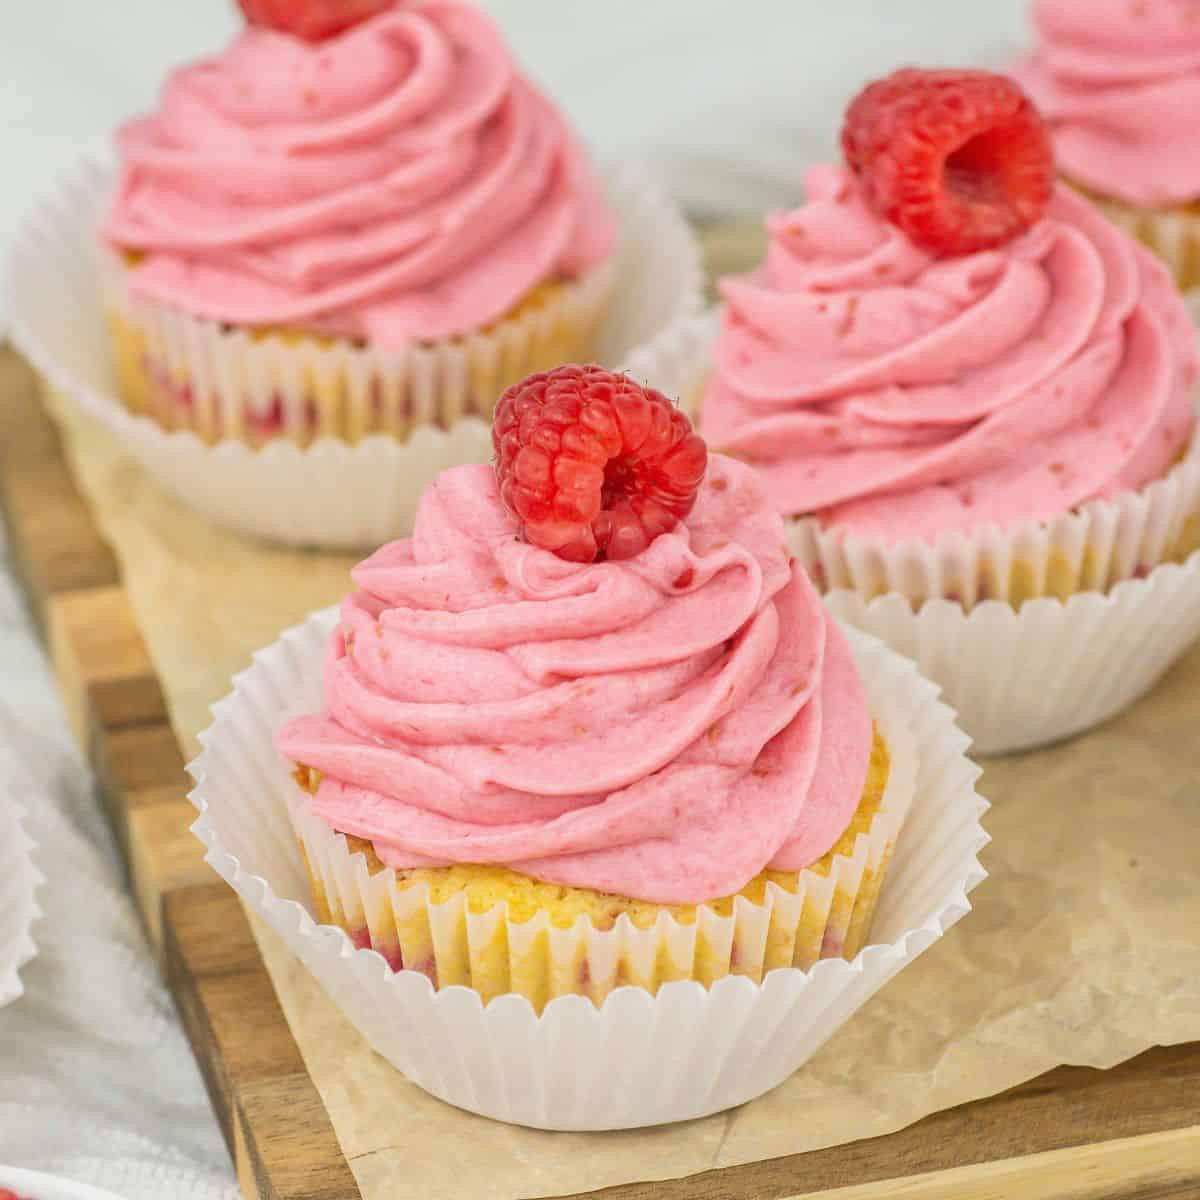 Pink cupcakes with raspberry frosting on a wooden cutting board.